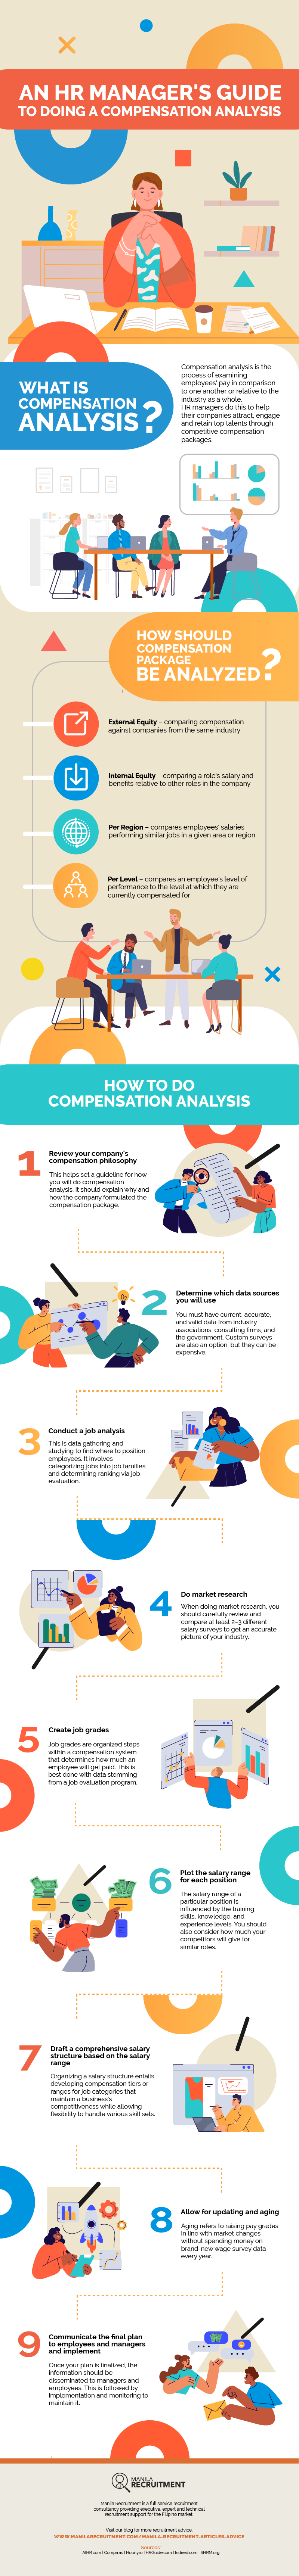 An HR Manager's Guide to Doing a Compensation Analysis infographic